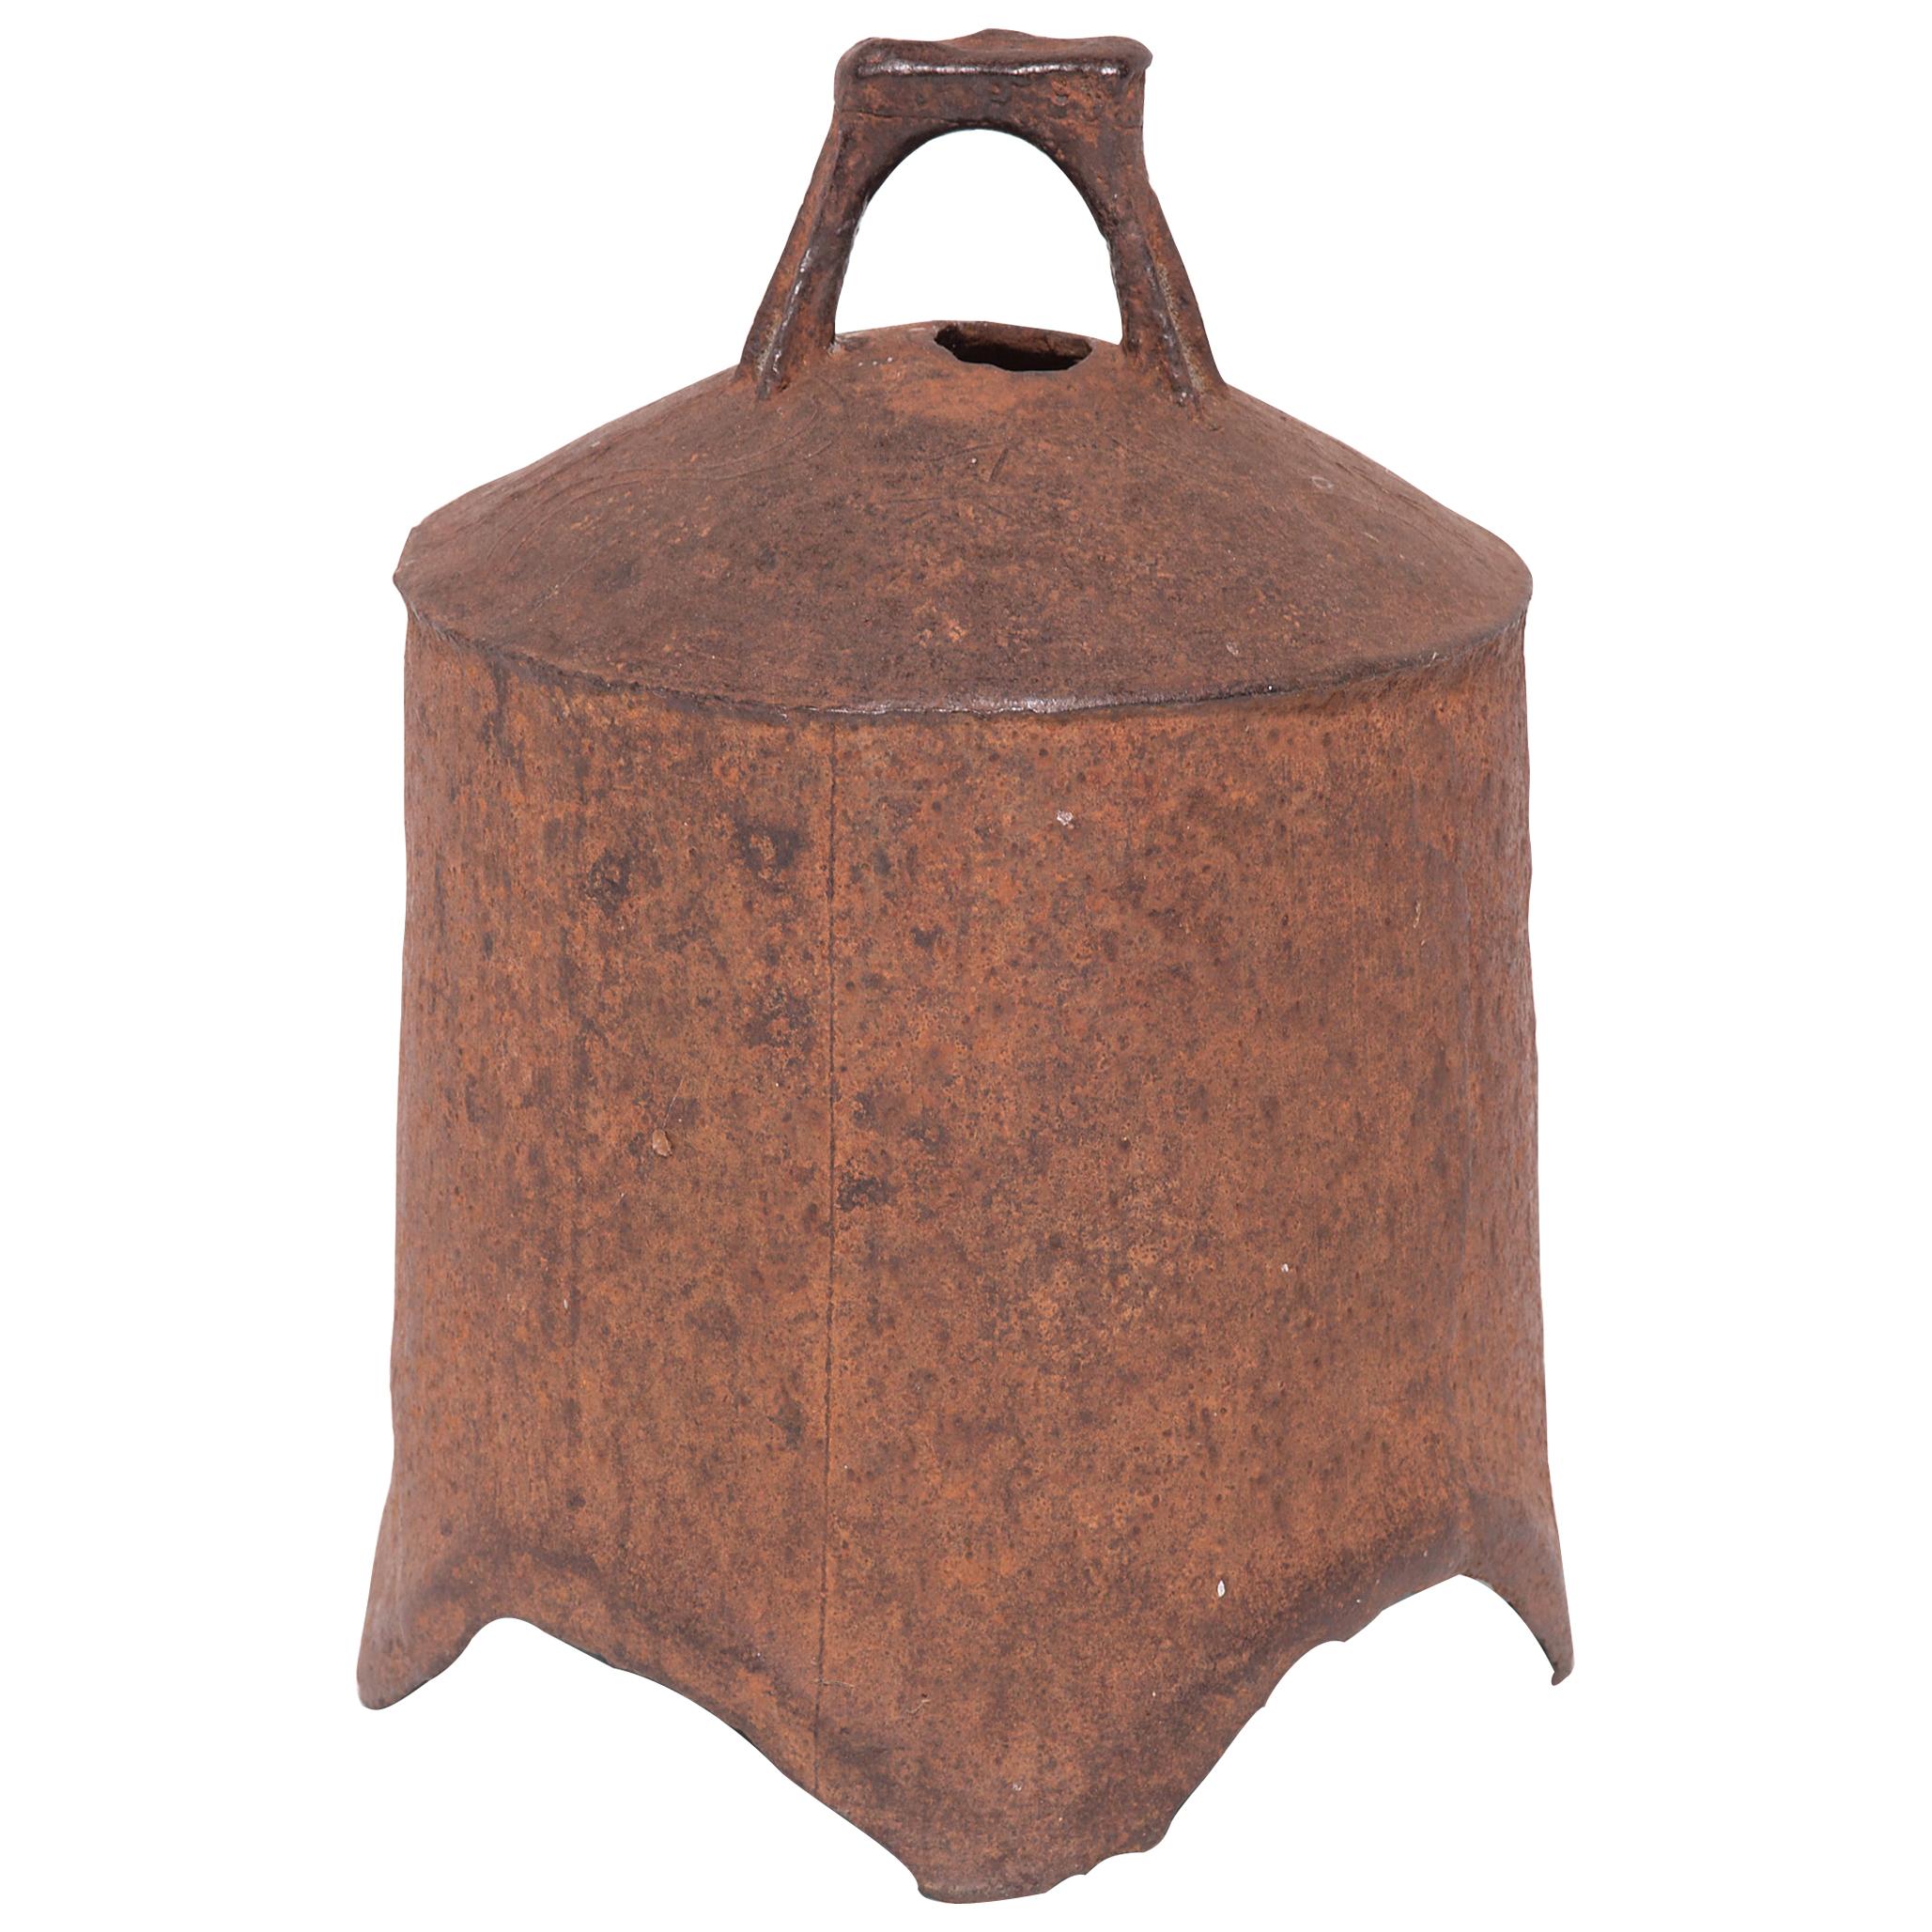 Provincial Chinese Iron Bell, c. 1850